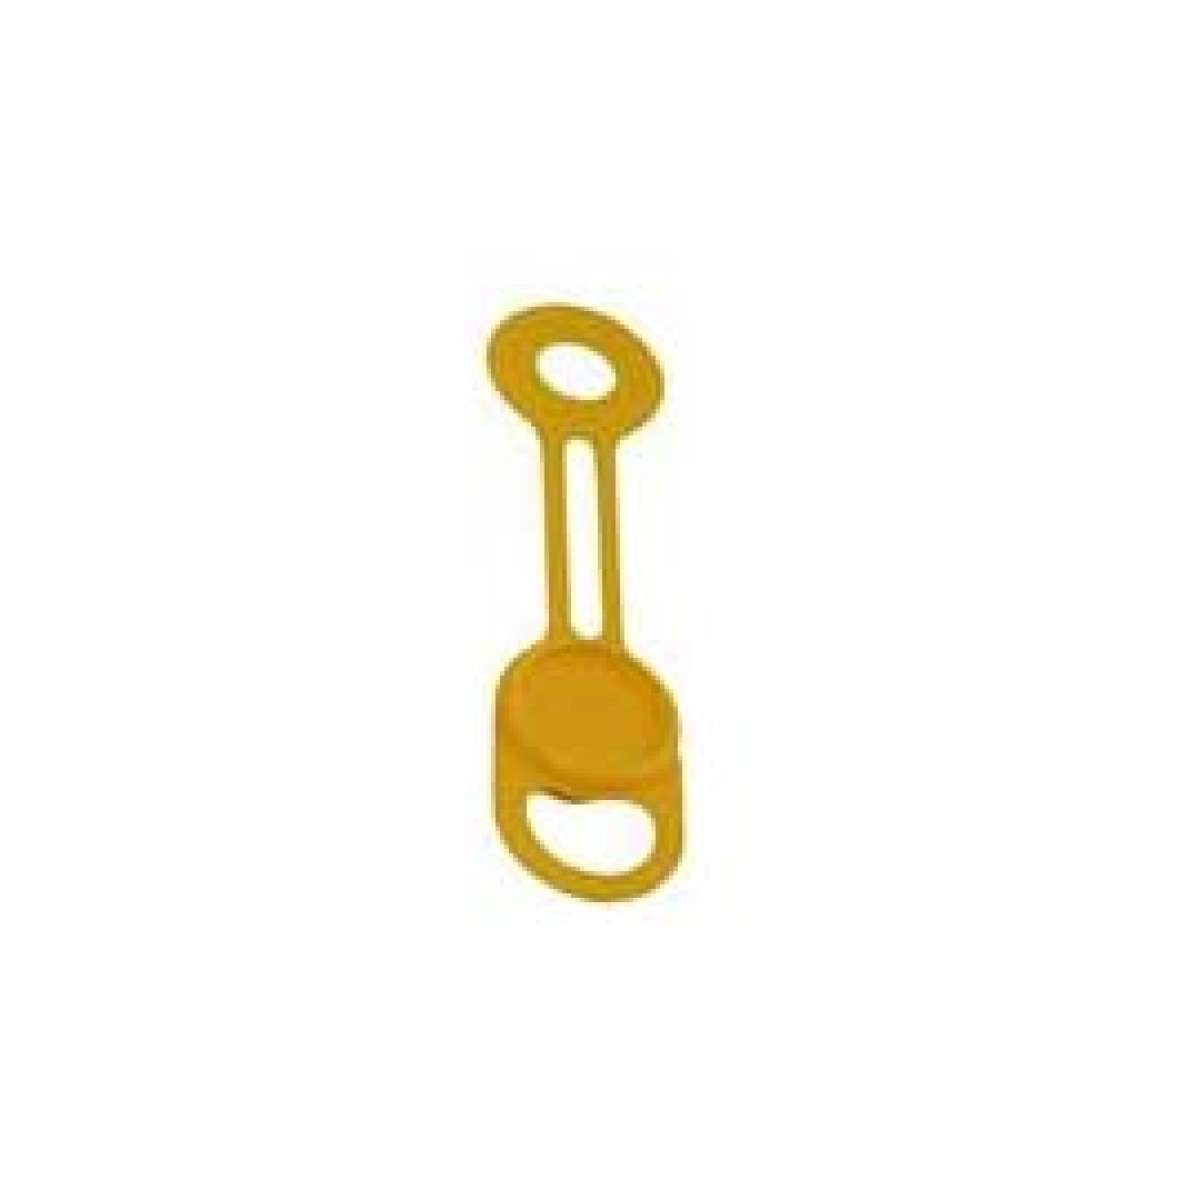 17/32" Grease Fitting Protector (Yellow) - Pack of 100